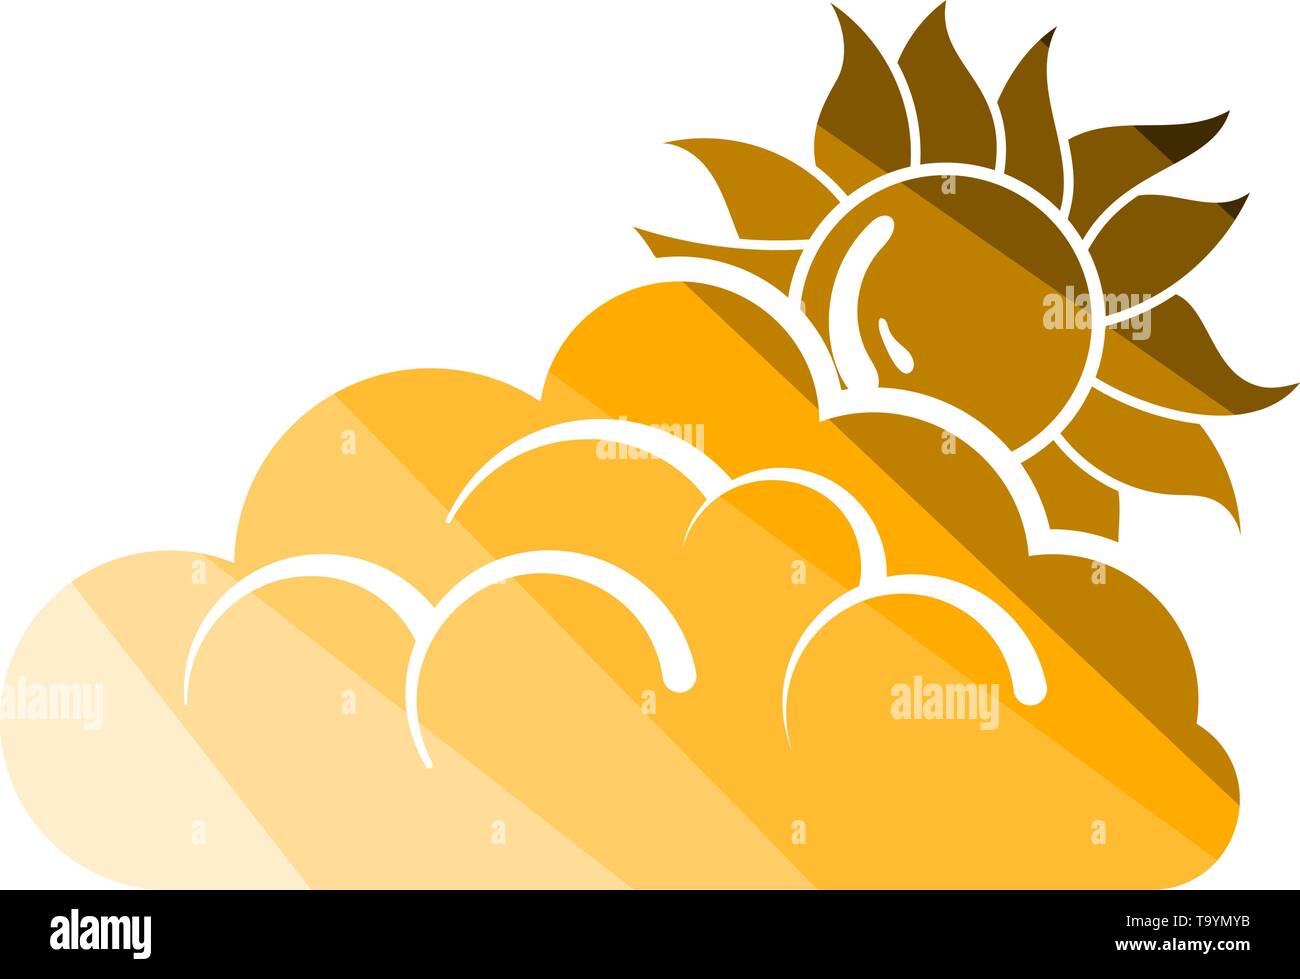 Sun Behind Clouds Icon. Flat Color Ladder Design. Vector Illustration. Stock Vector